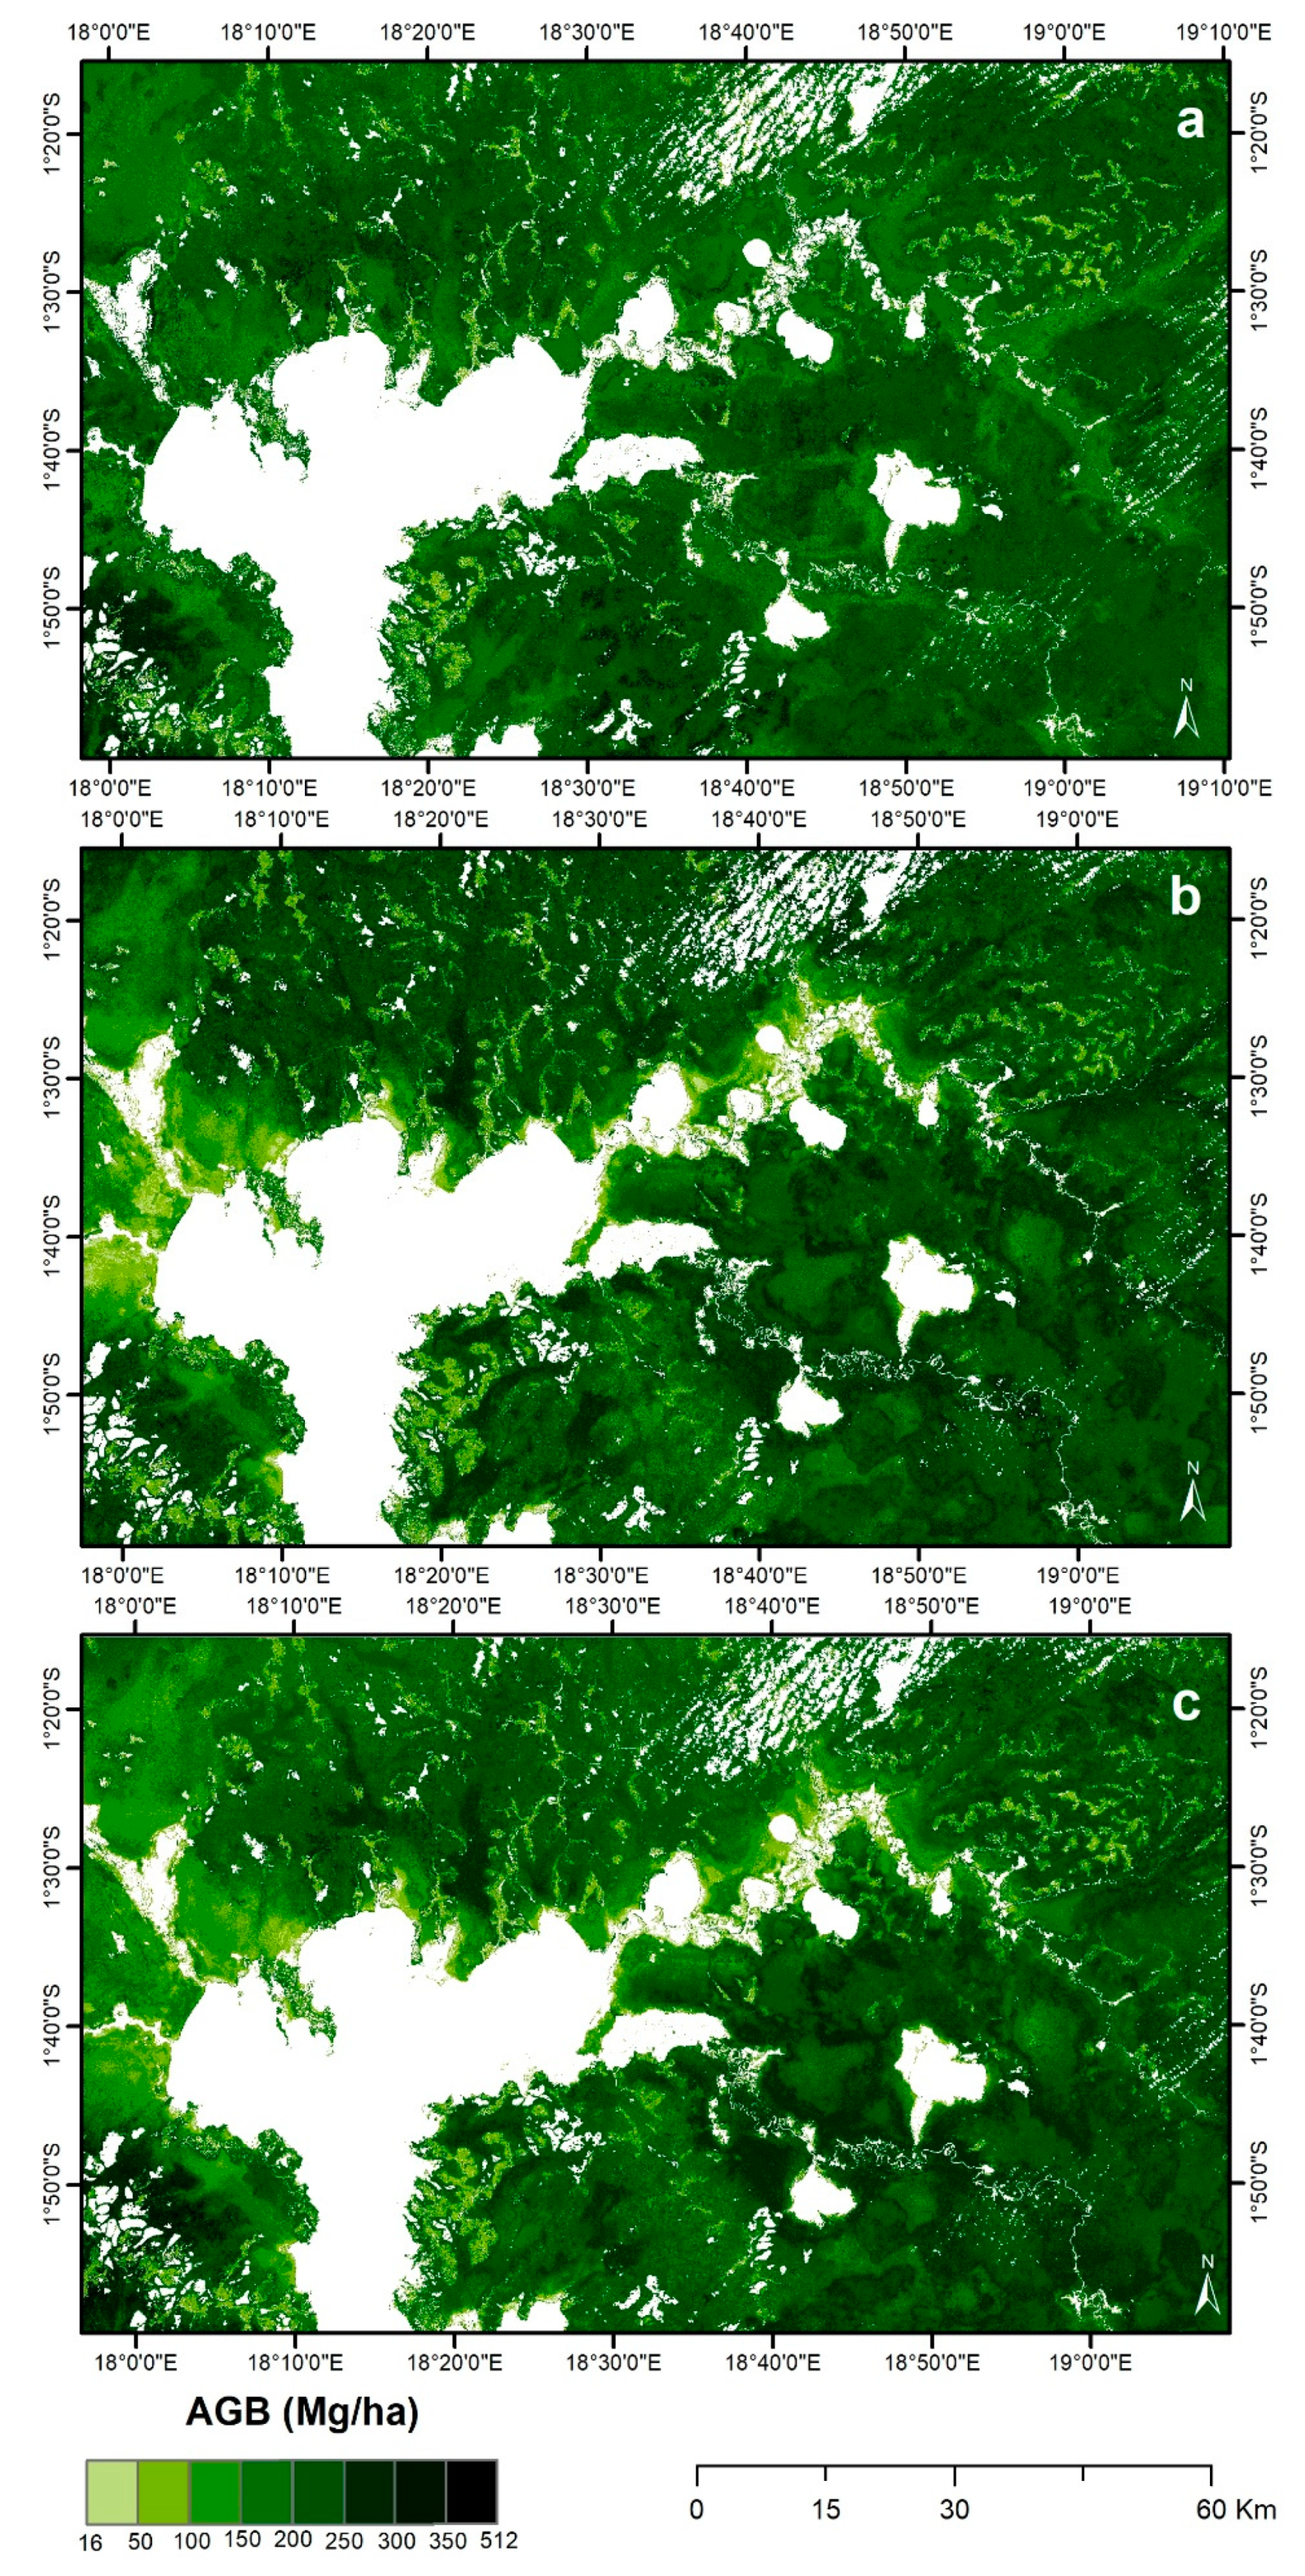 Remote Sensing | Free Full-Text | Democratic Republic of the Congo Tropical  Forest Canopy Height and Aboveground Biomass Estimation with Landsat-8  Operational Land Imager (OLI) and Airborne LiDAR Data: The Effect of